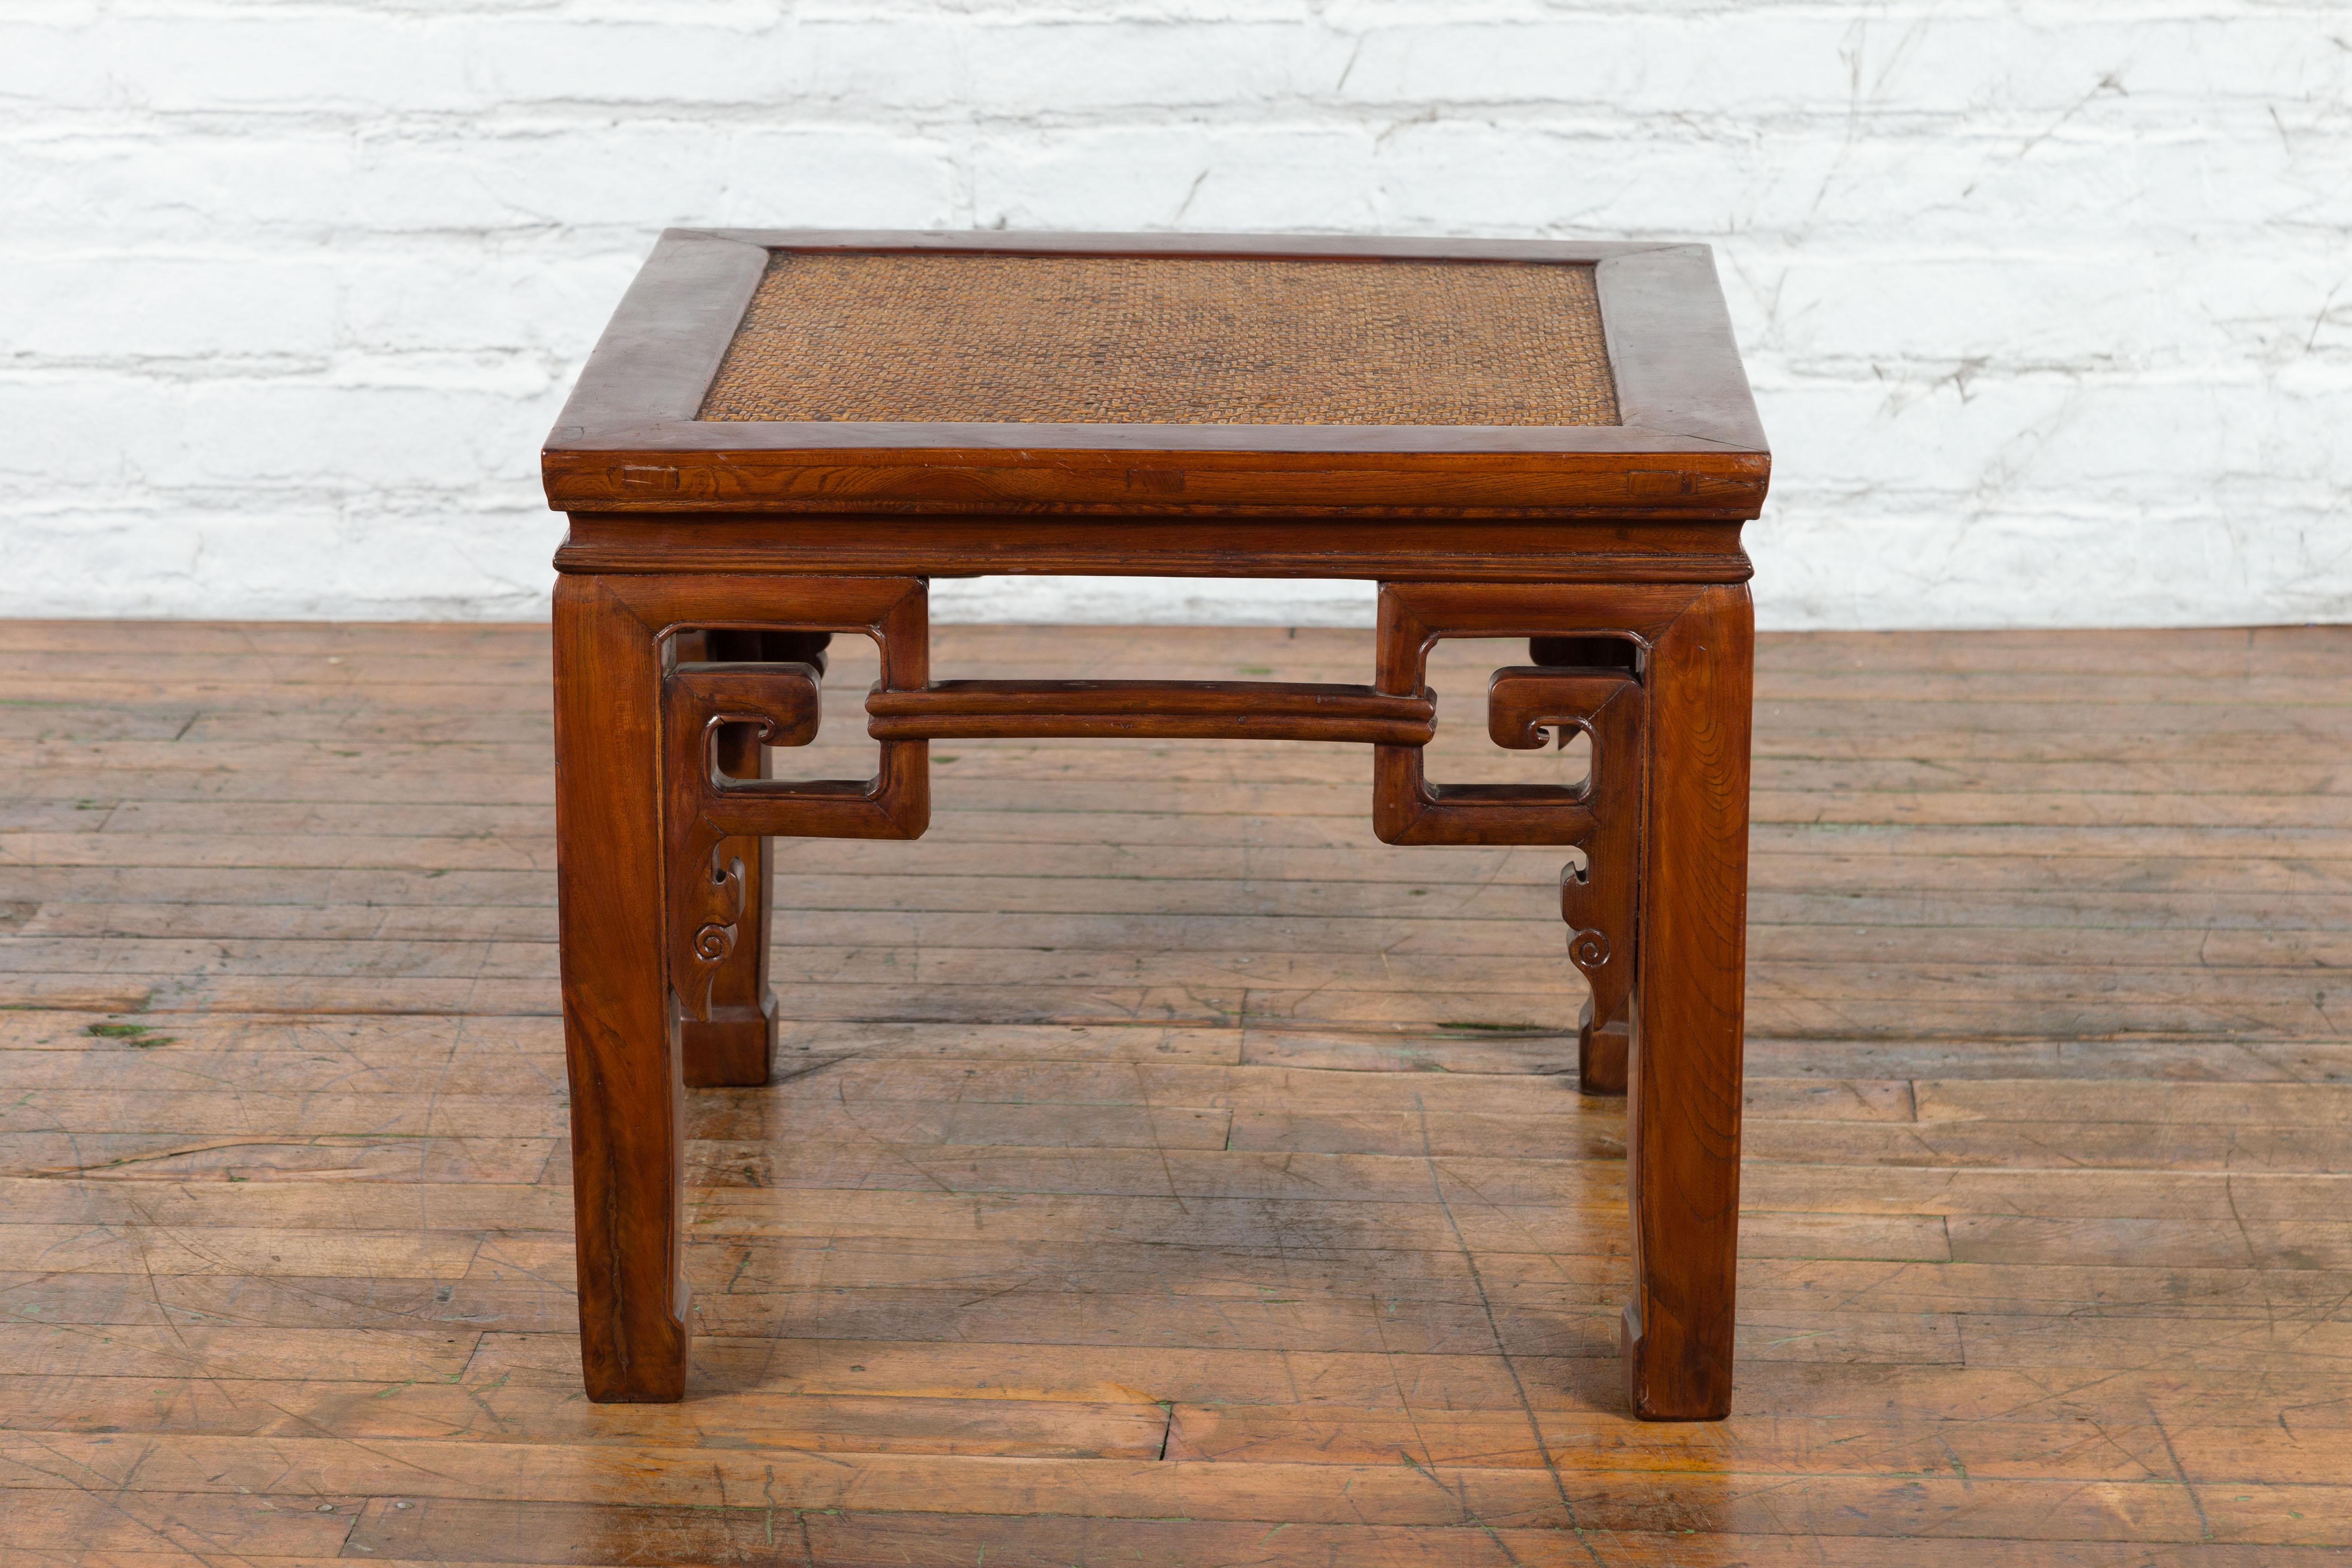 Chinese Qing Dynasty 19th Century Stool or Drinks Table with Woven Rattan Top For Sale 8